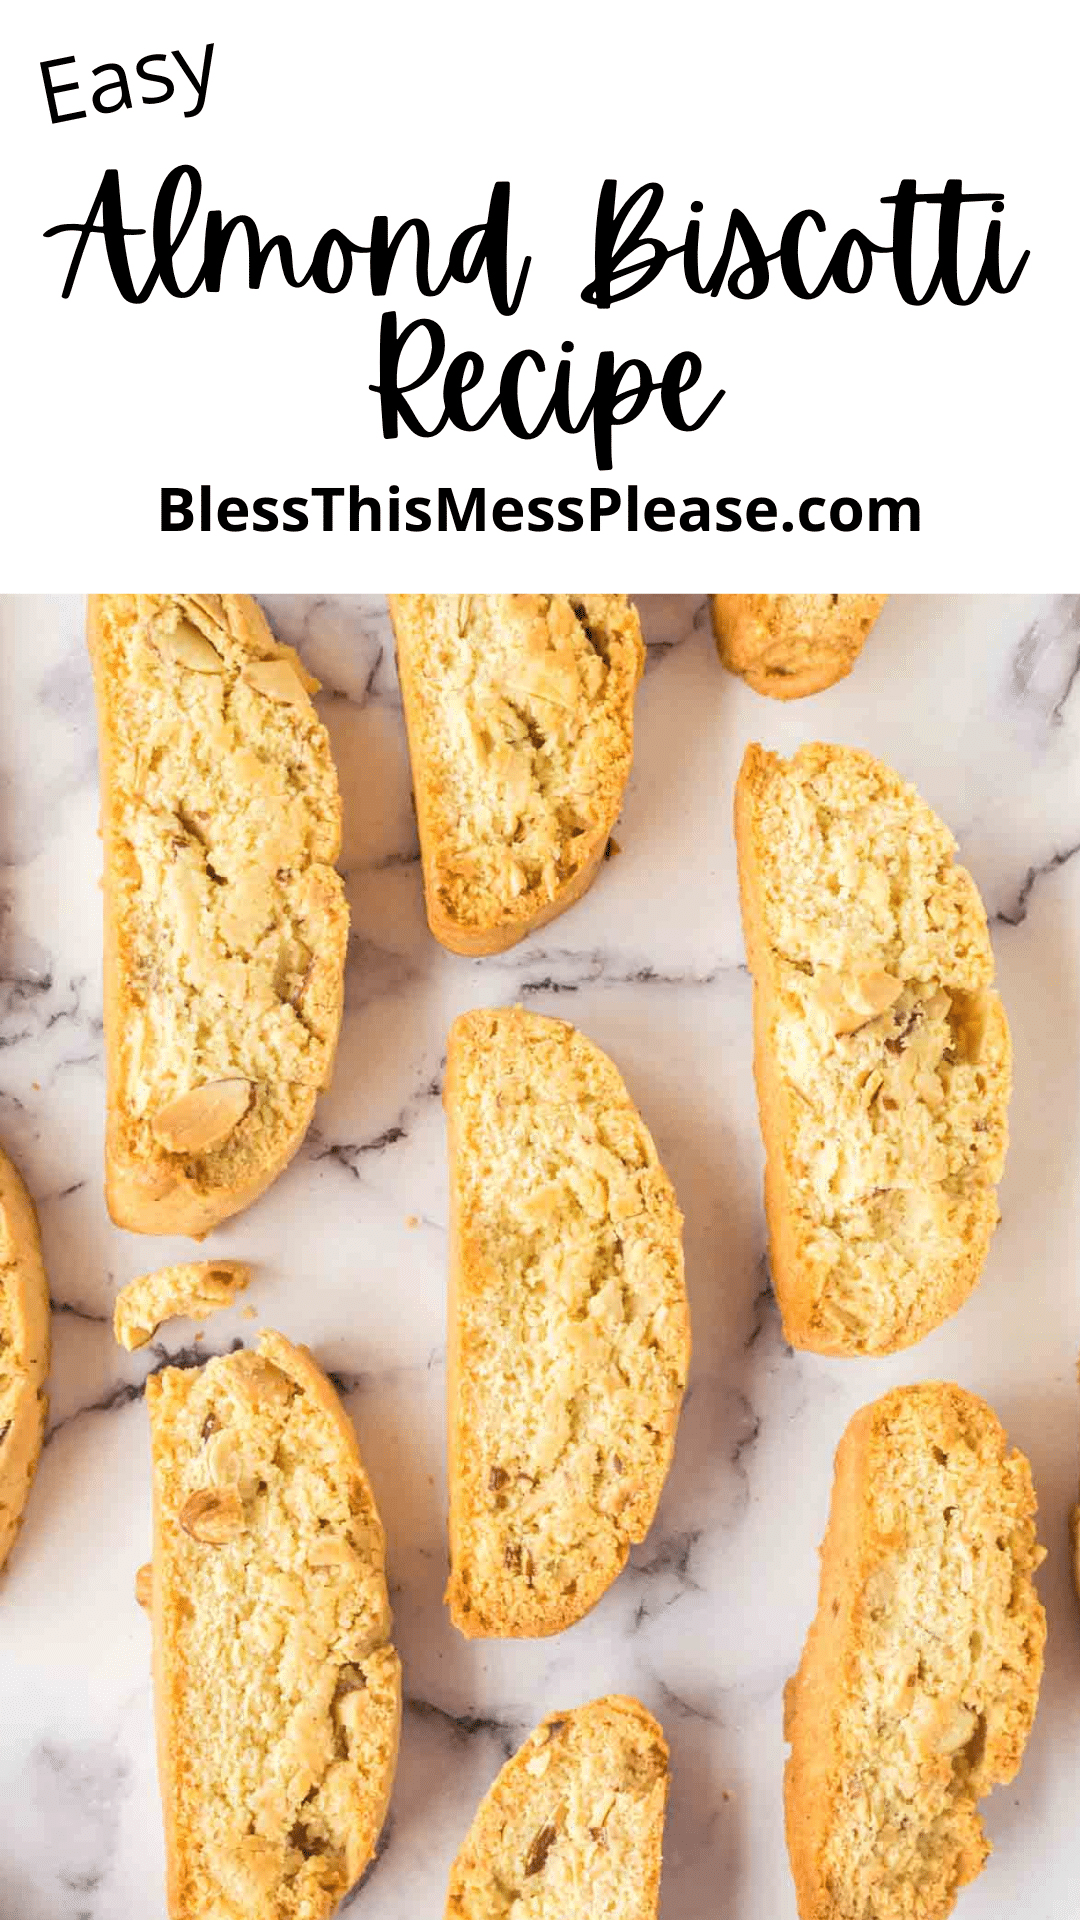 Buttered baking pan for homemade biscotti by bakethiscake